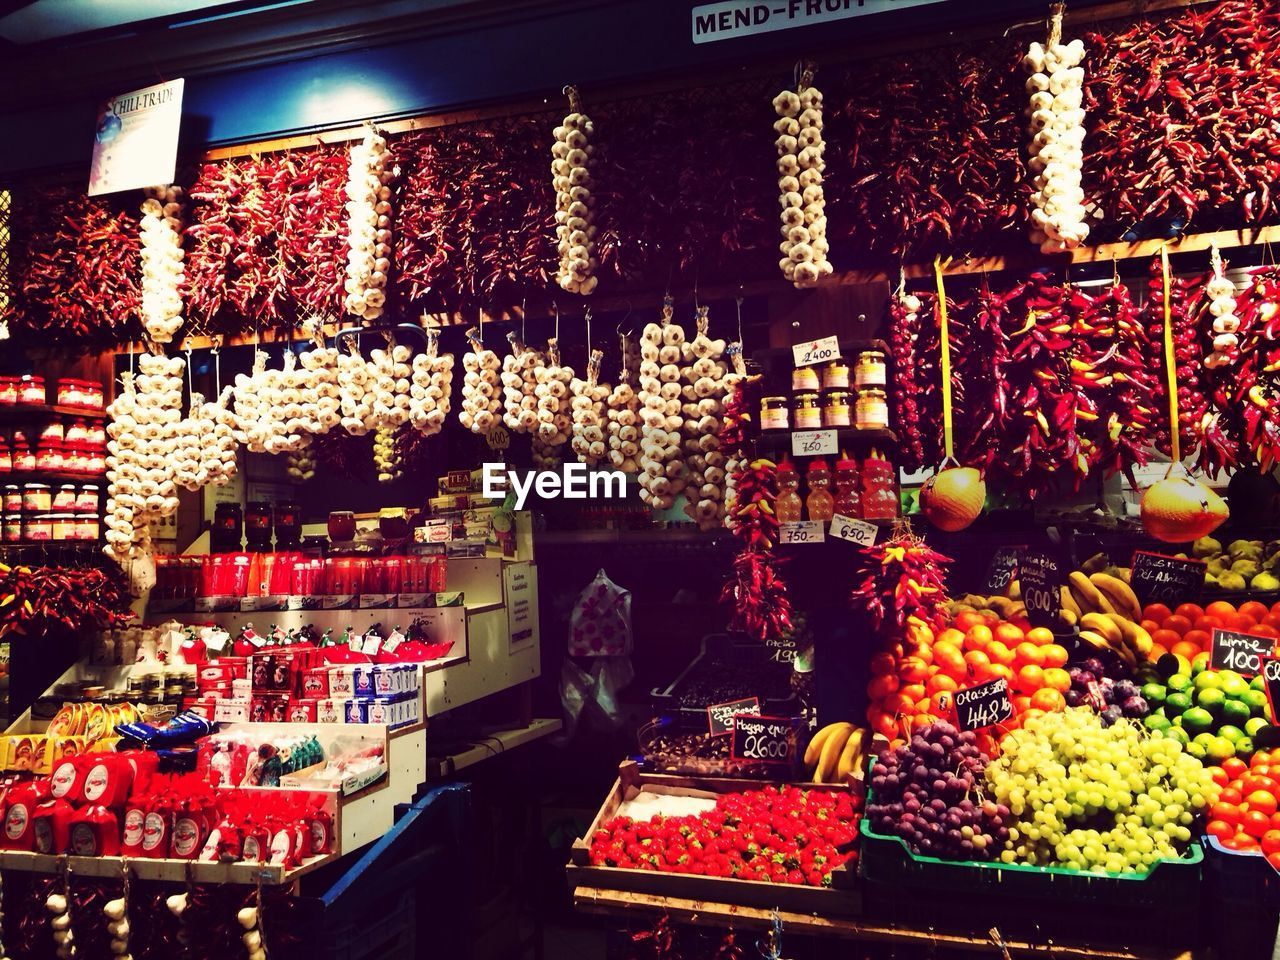 Various spices and fruits in market stall for sale